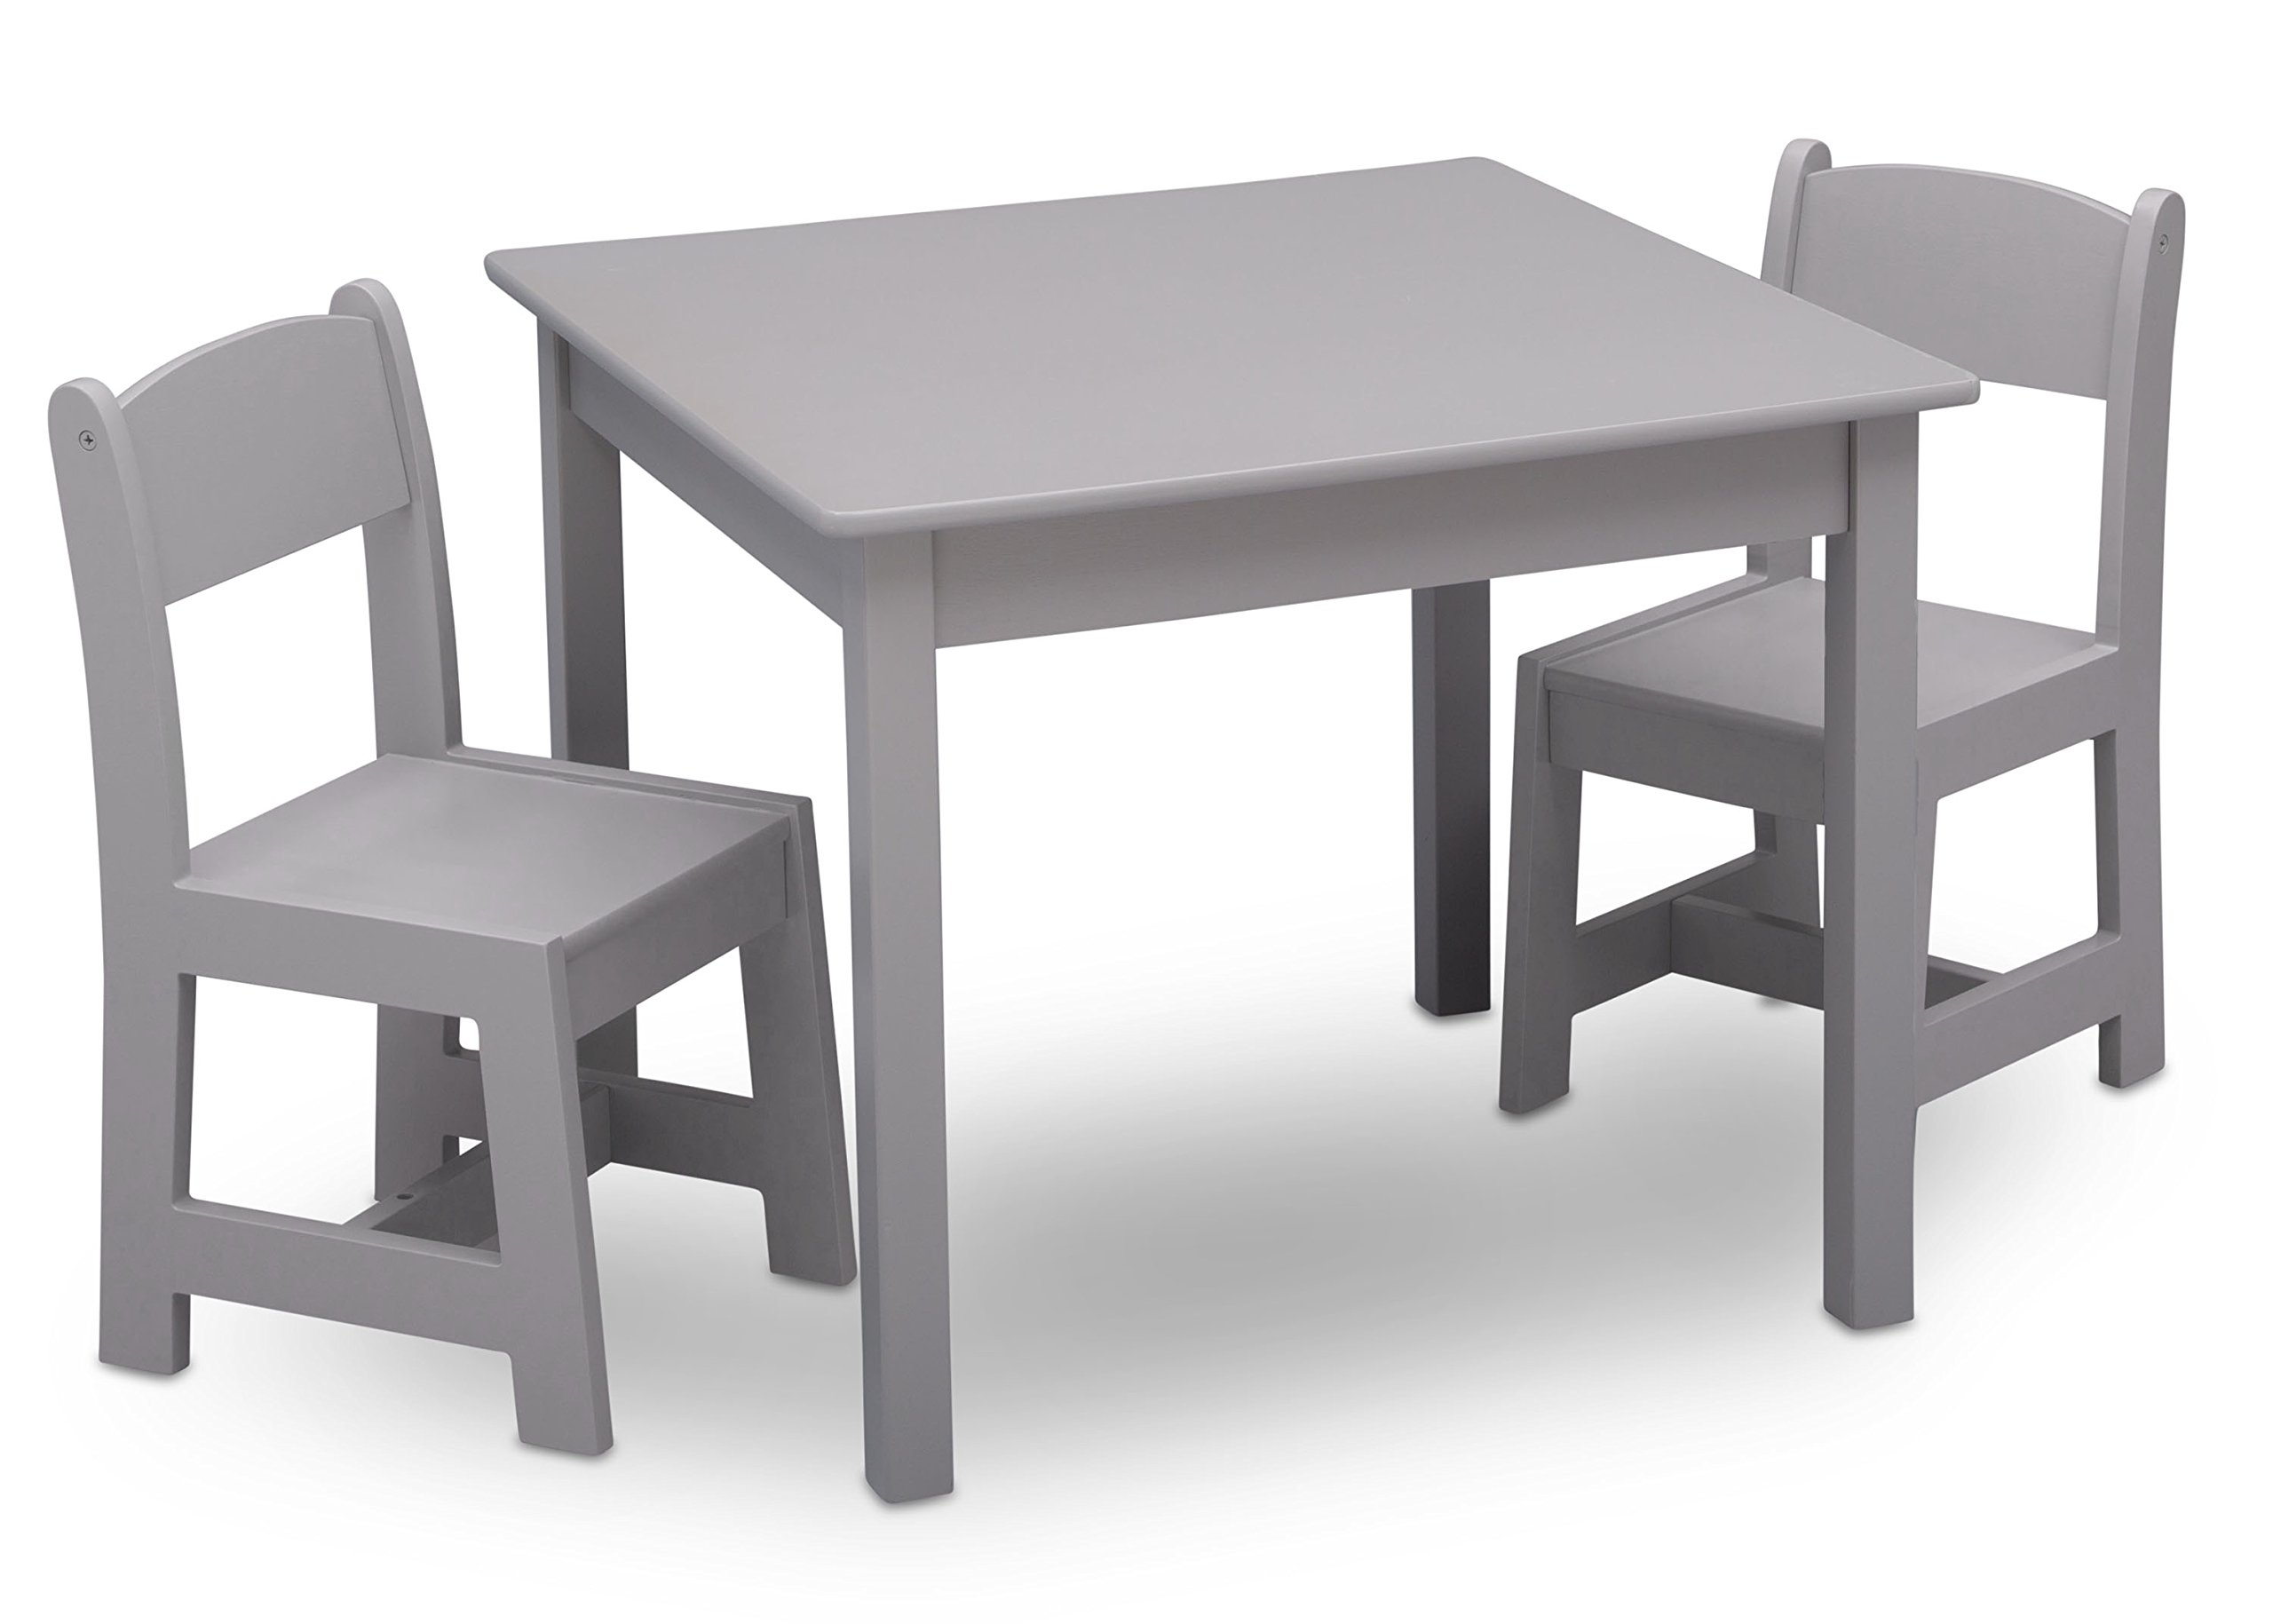 Delta Children MySize Kids Wood Table and Chair Set (2 ...